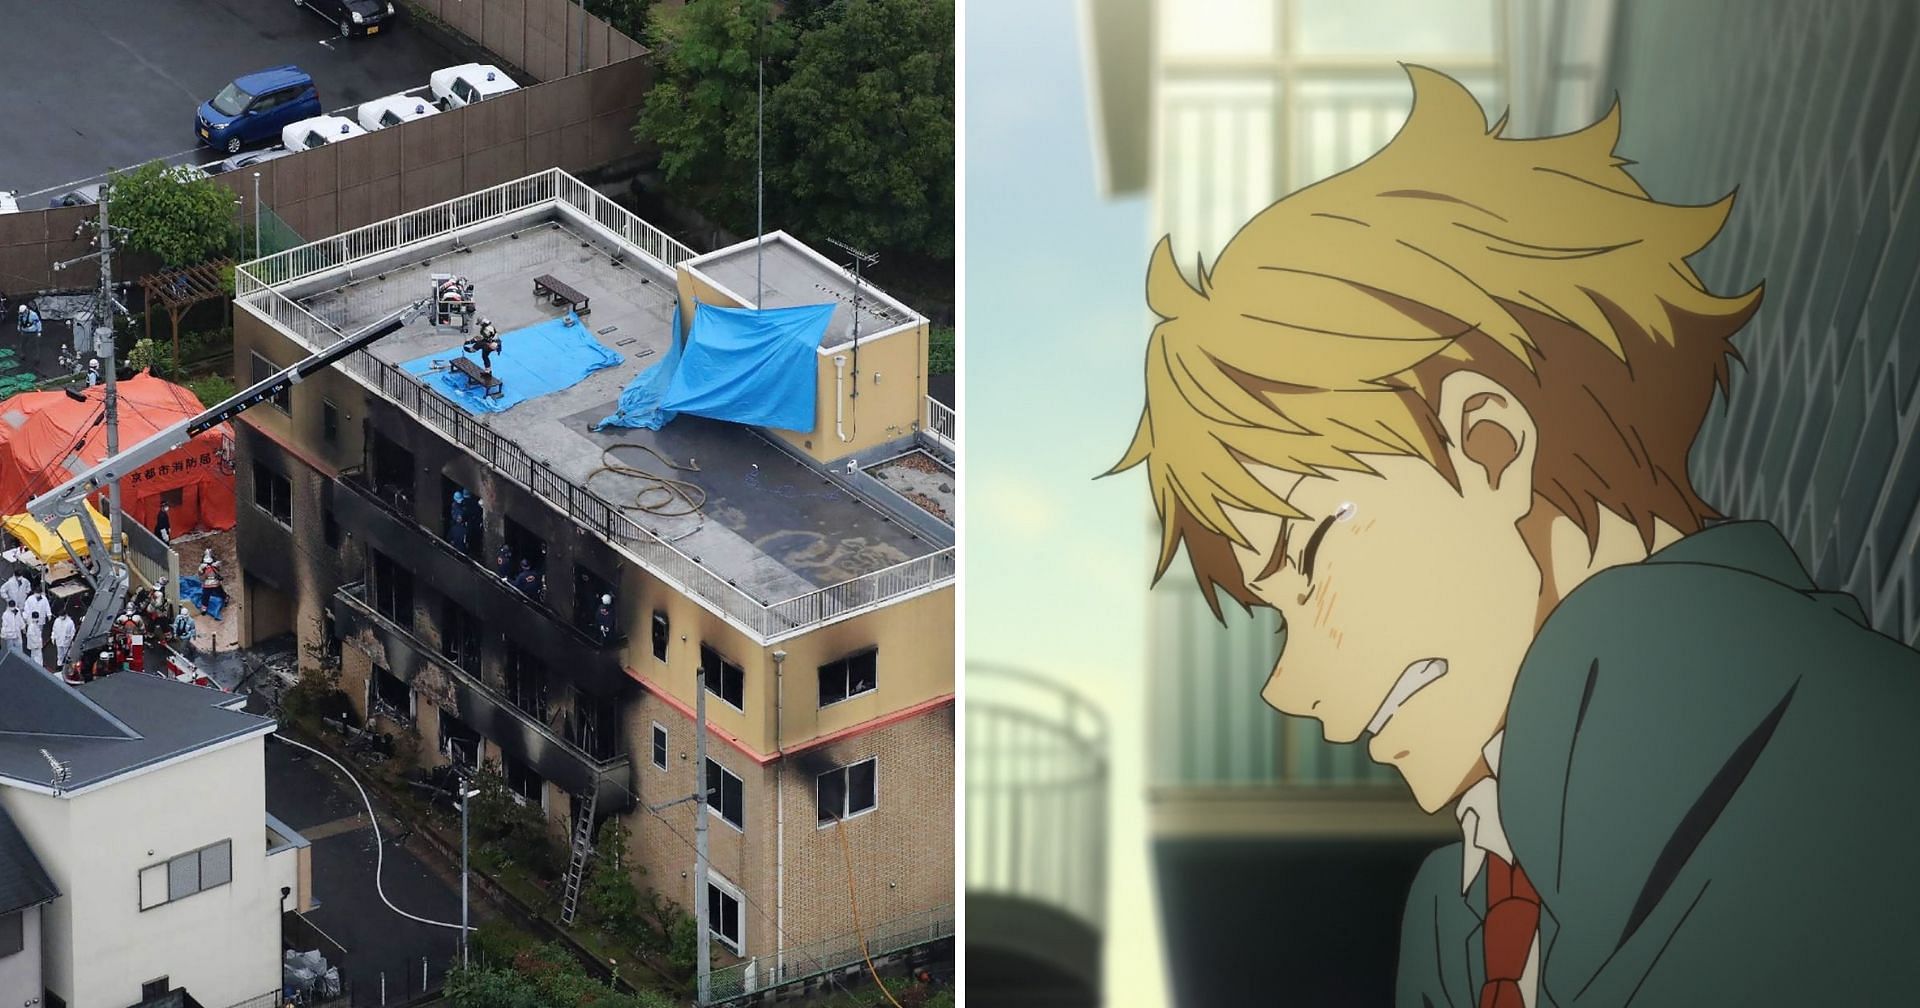 Is Kyoto Animation going to continue making anime and films after the fire?  - Quora